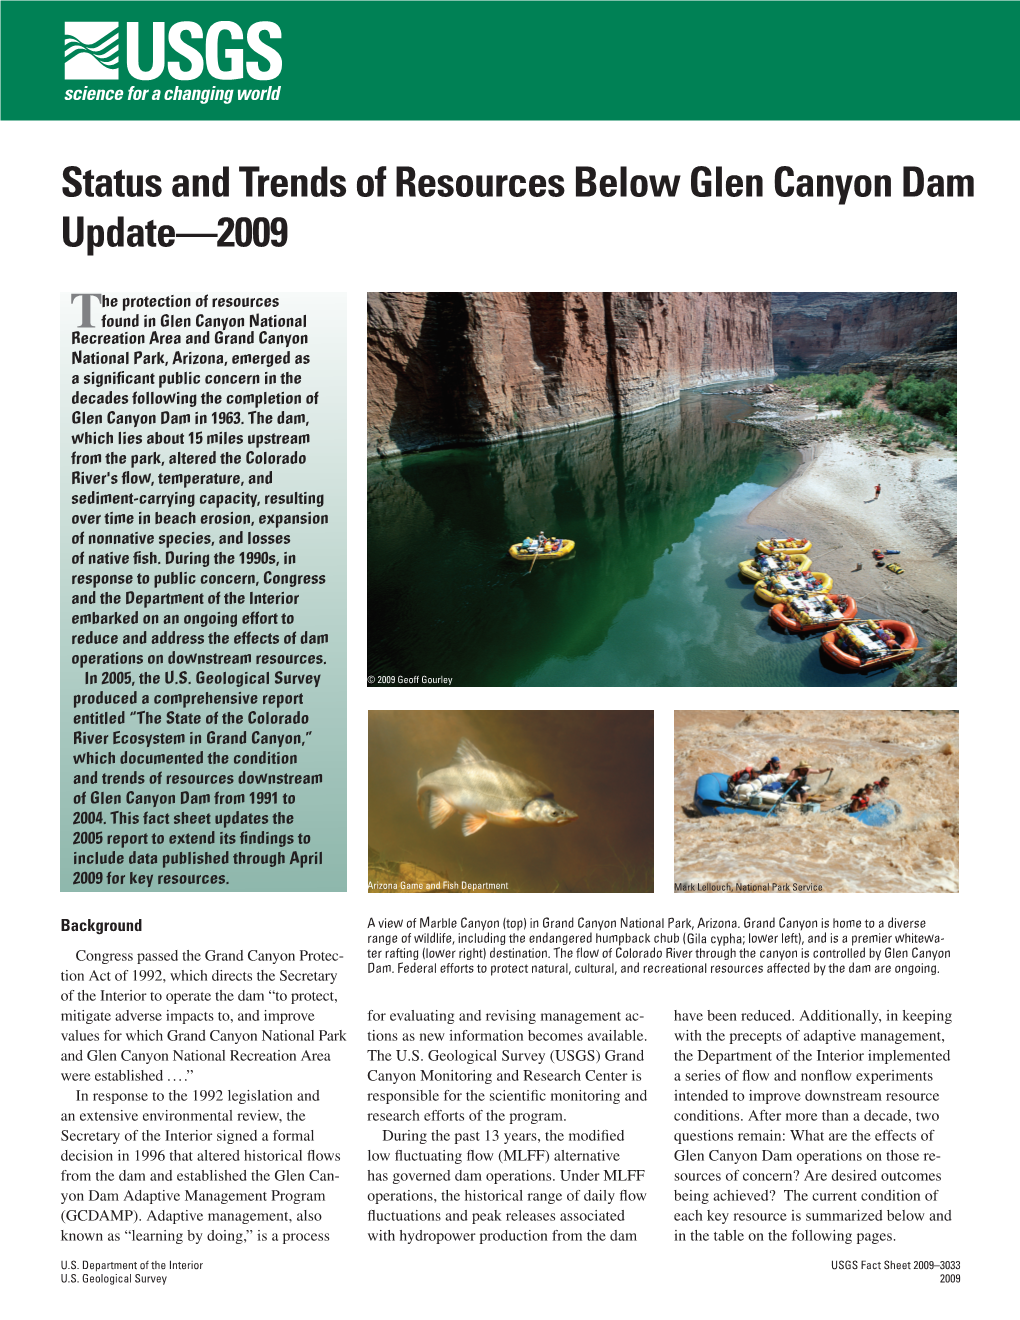 Status and Trends of Resources Below Glen Canyon Dam Update—2009